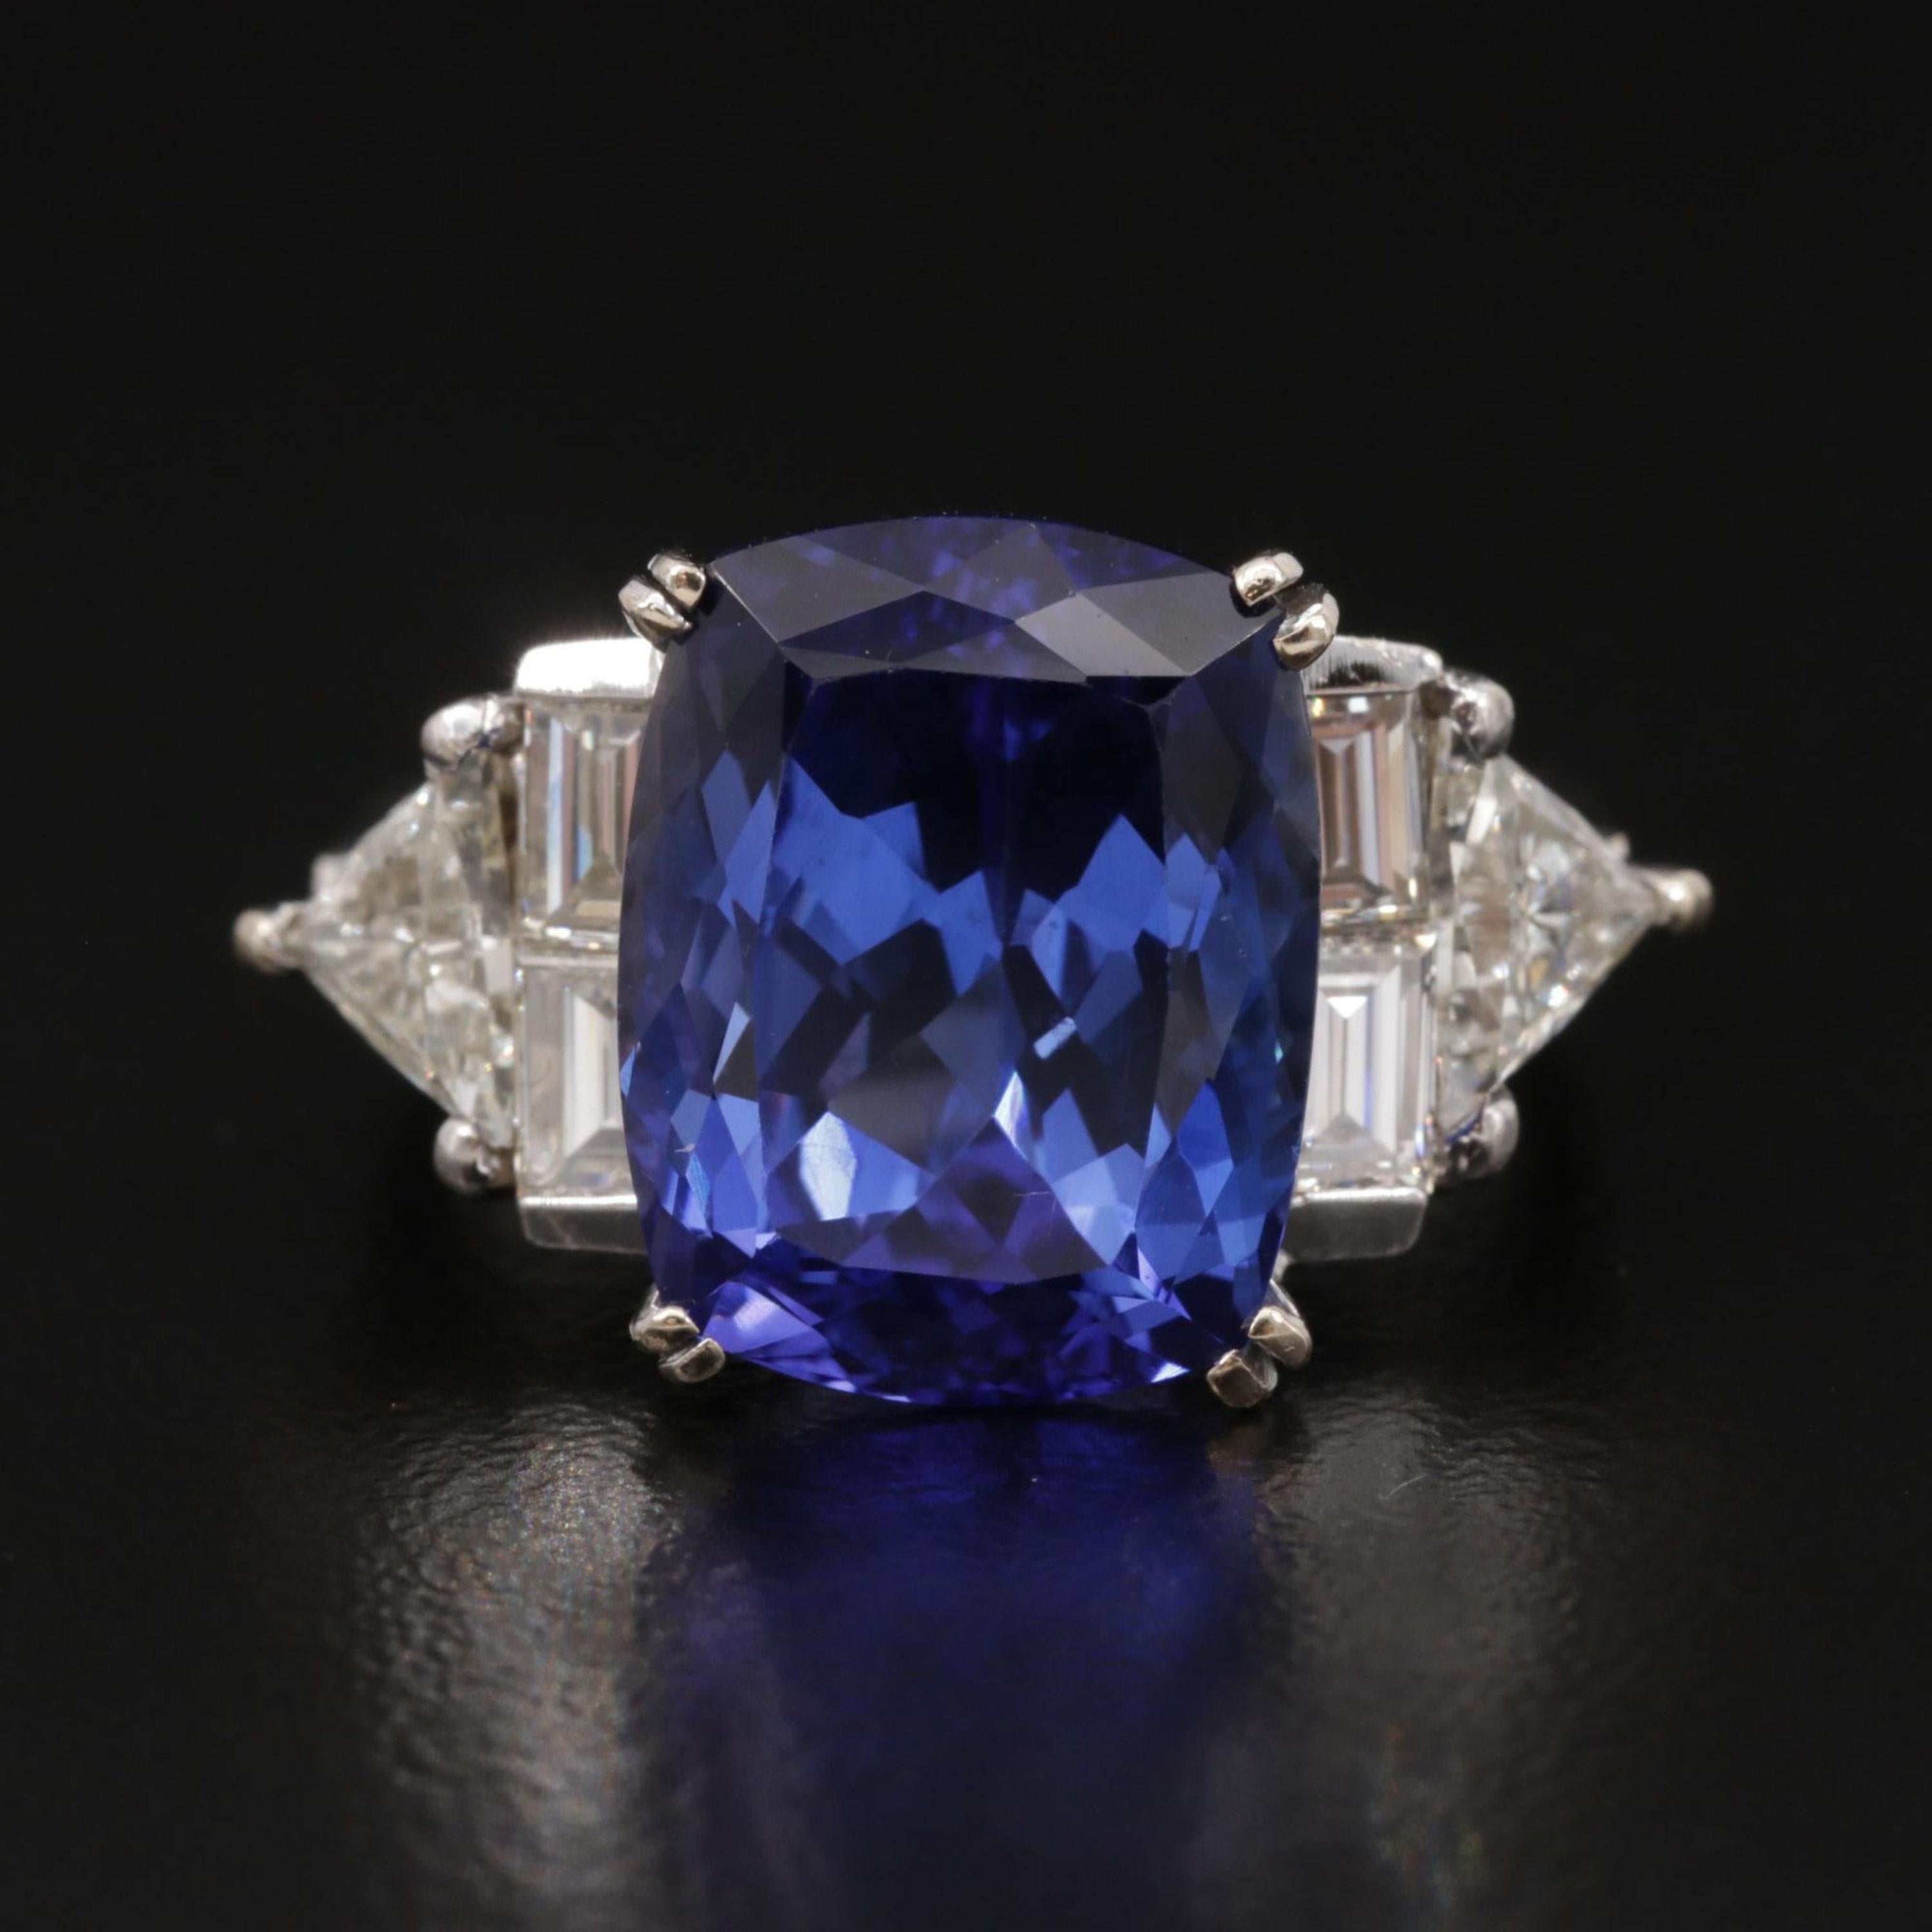 For Sale:  4 Carat Natural Sapphire Diamond Engagement Ring Set in 18K Gold, Cocktail Ring 6